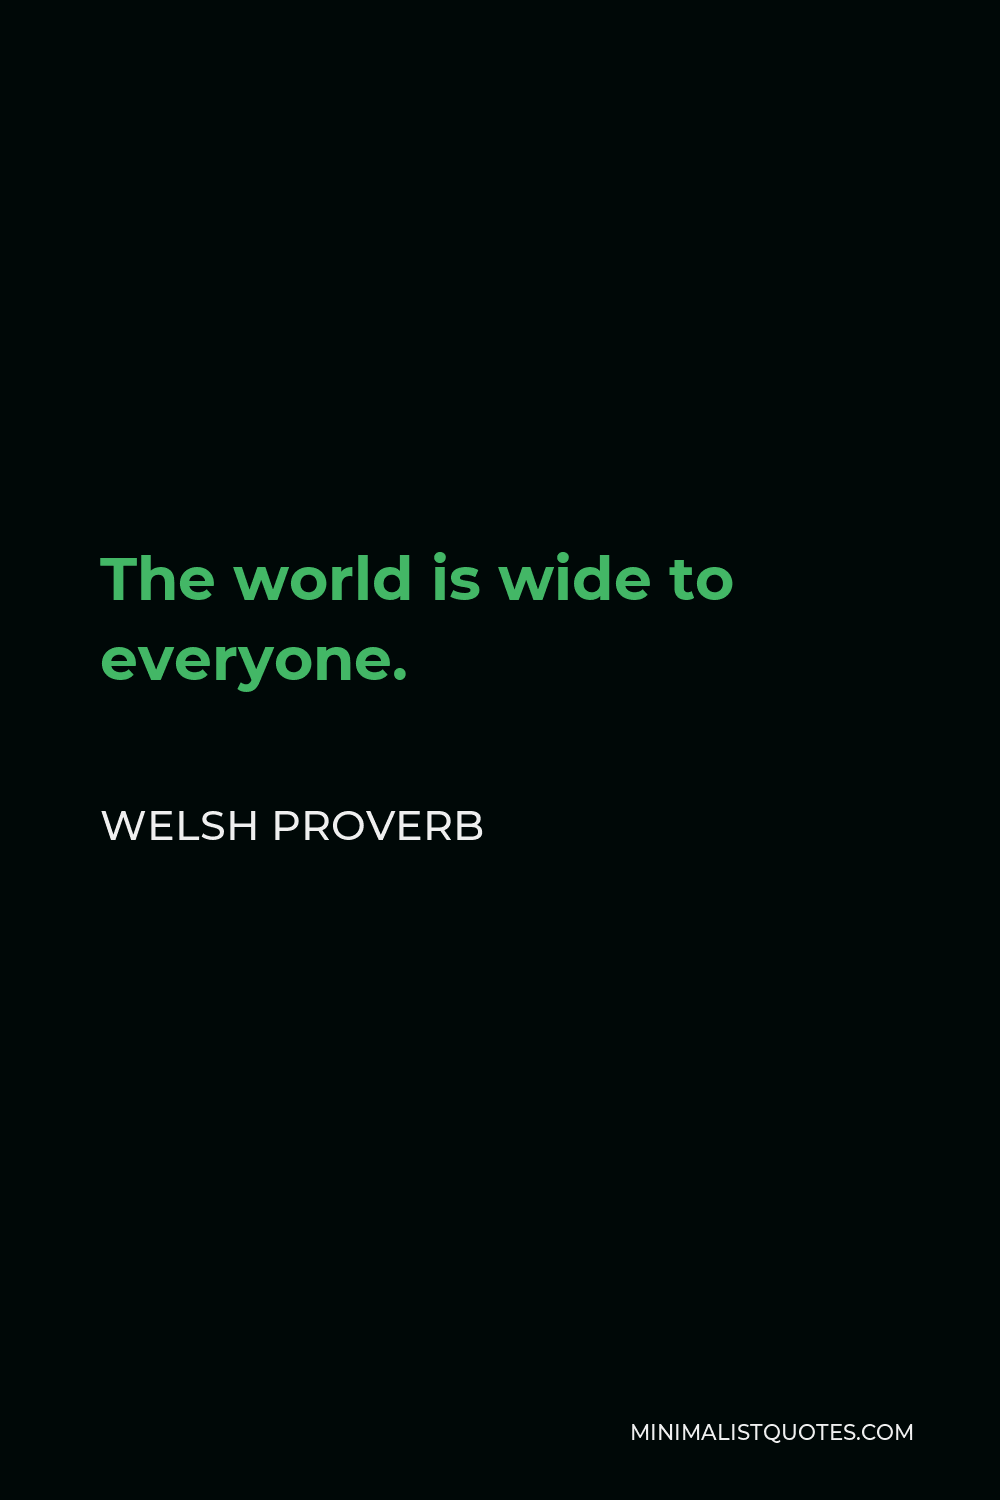 Welsh Proverb Quote - The world is wide to everyone.